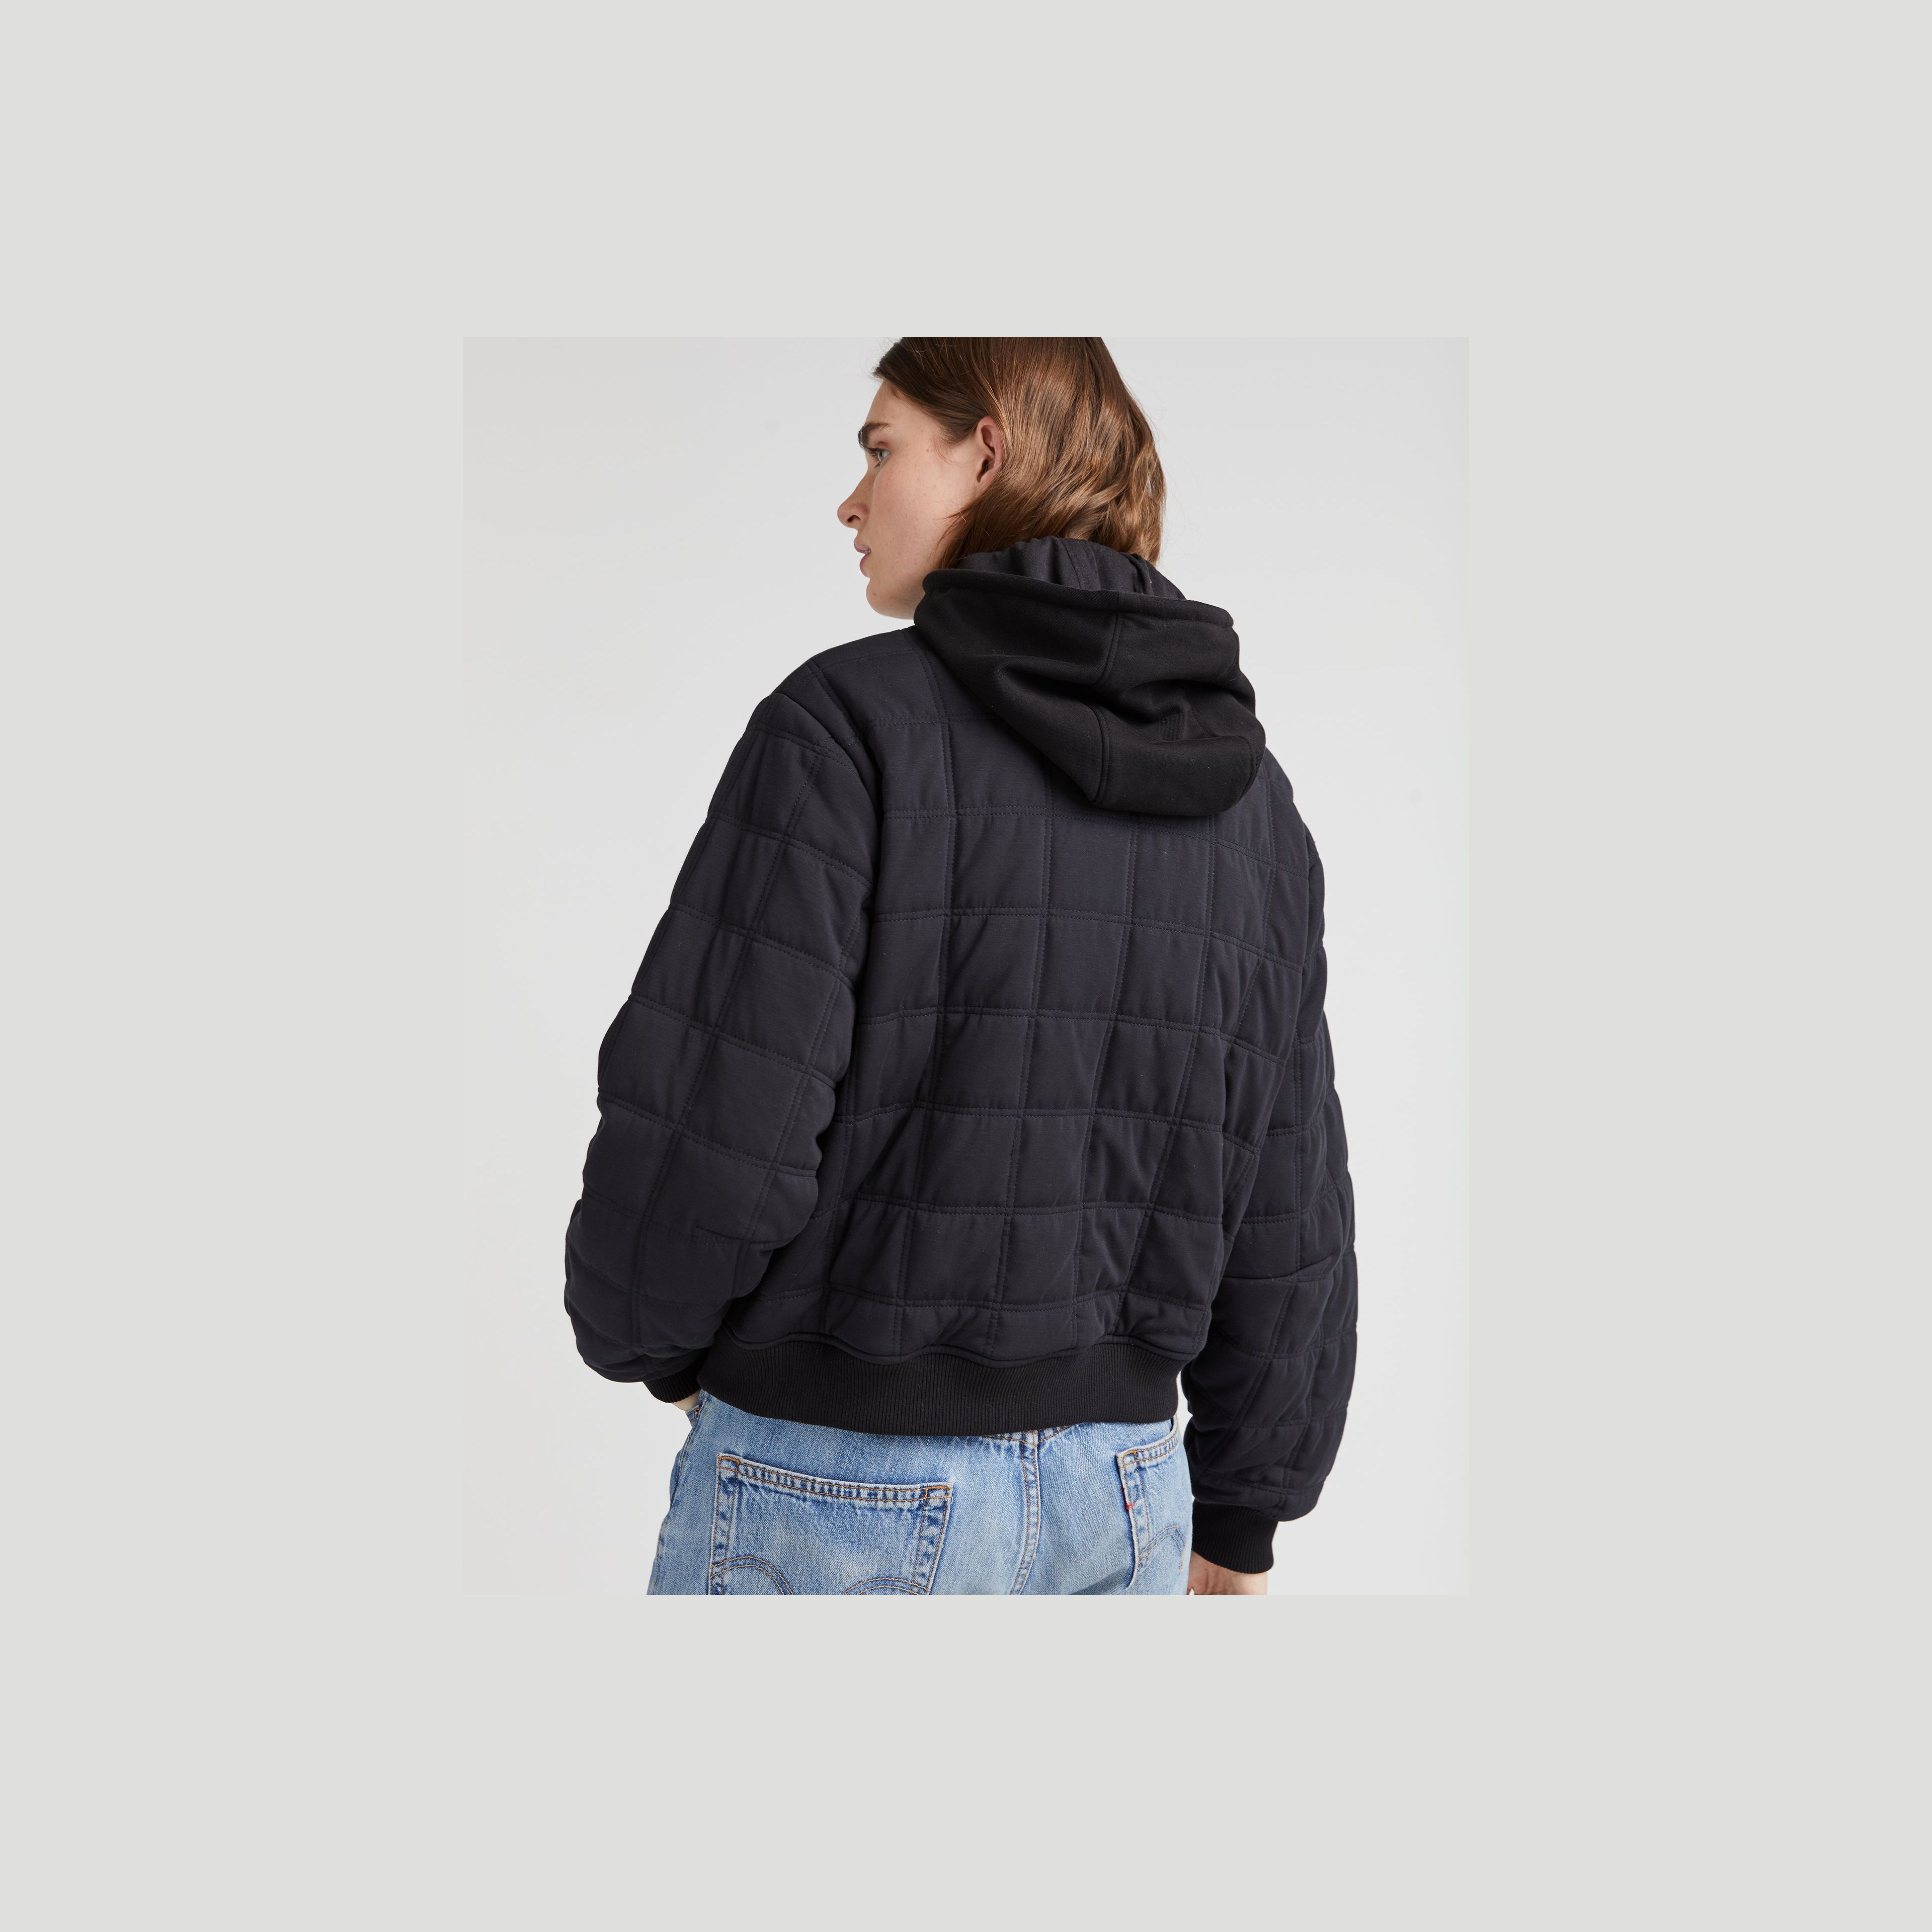 Women's Quilted Modal Bomber Jacket